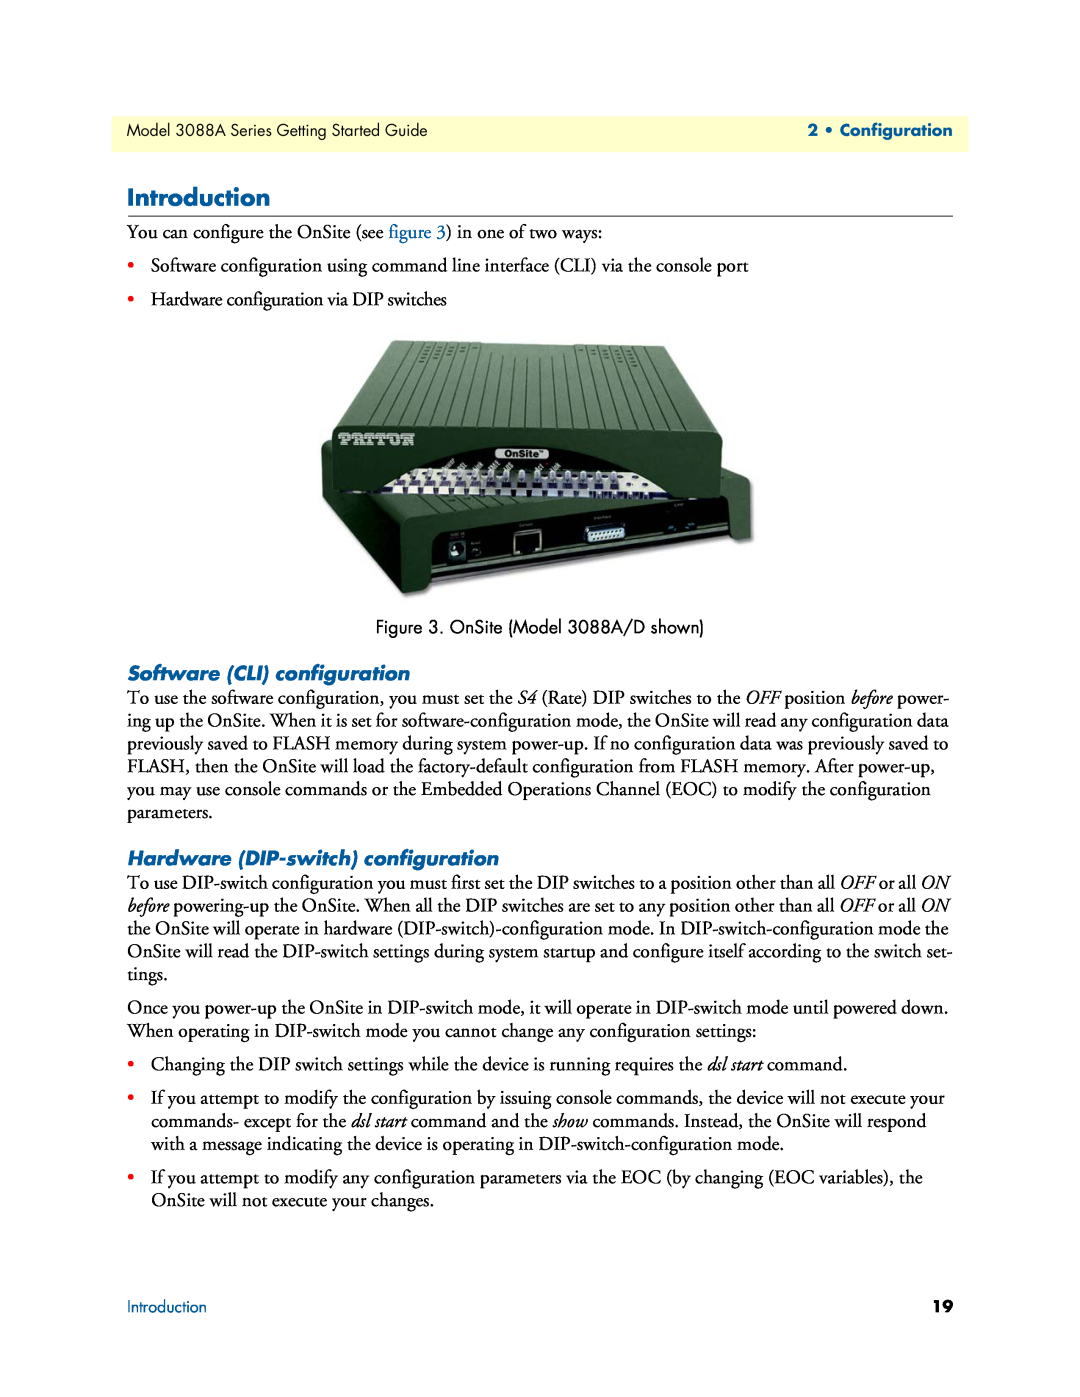 Patton electronic 3088A manual Introduction, Software CLI configuration, Hardware DIP-switch configuration 